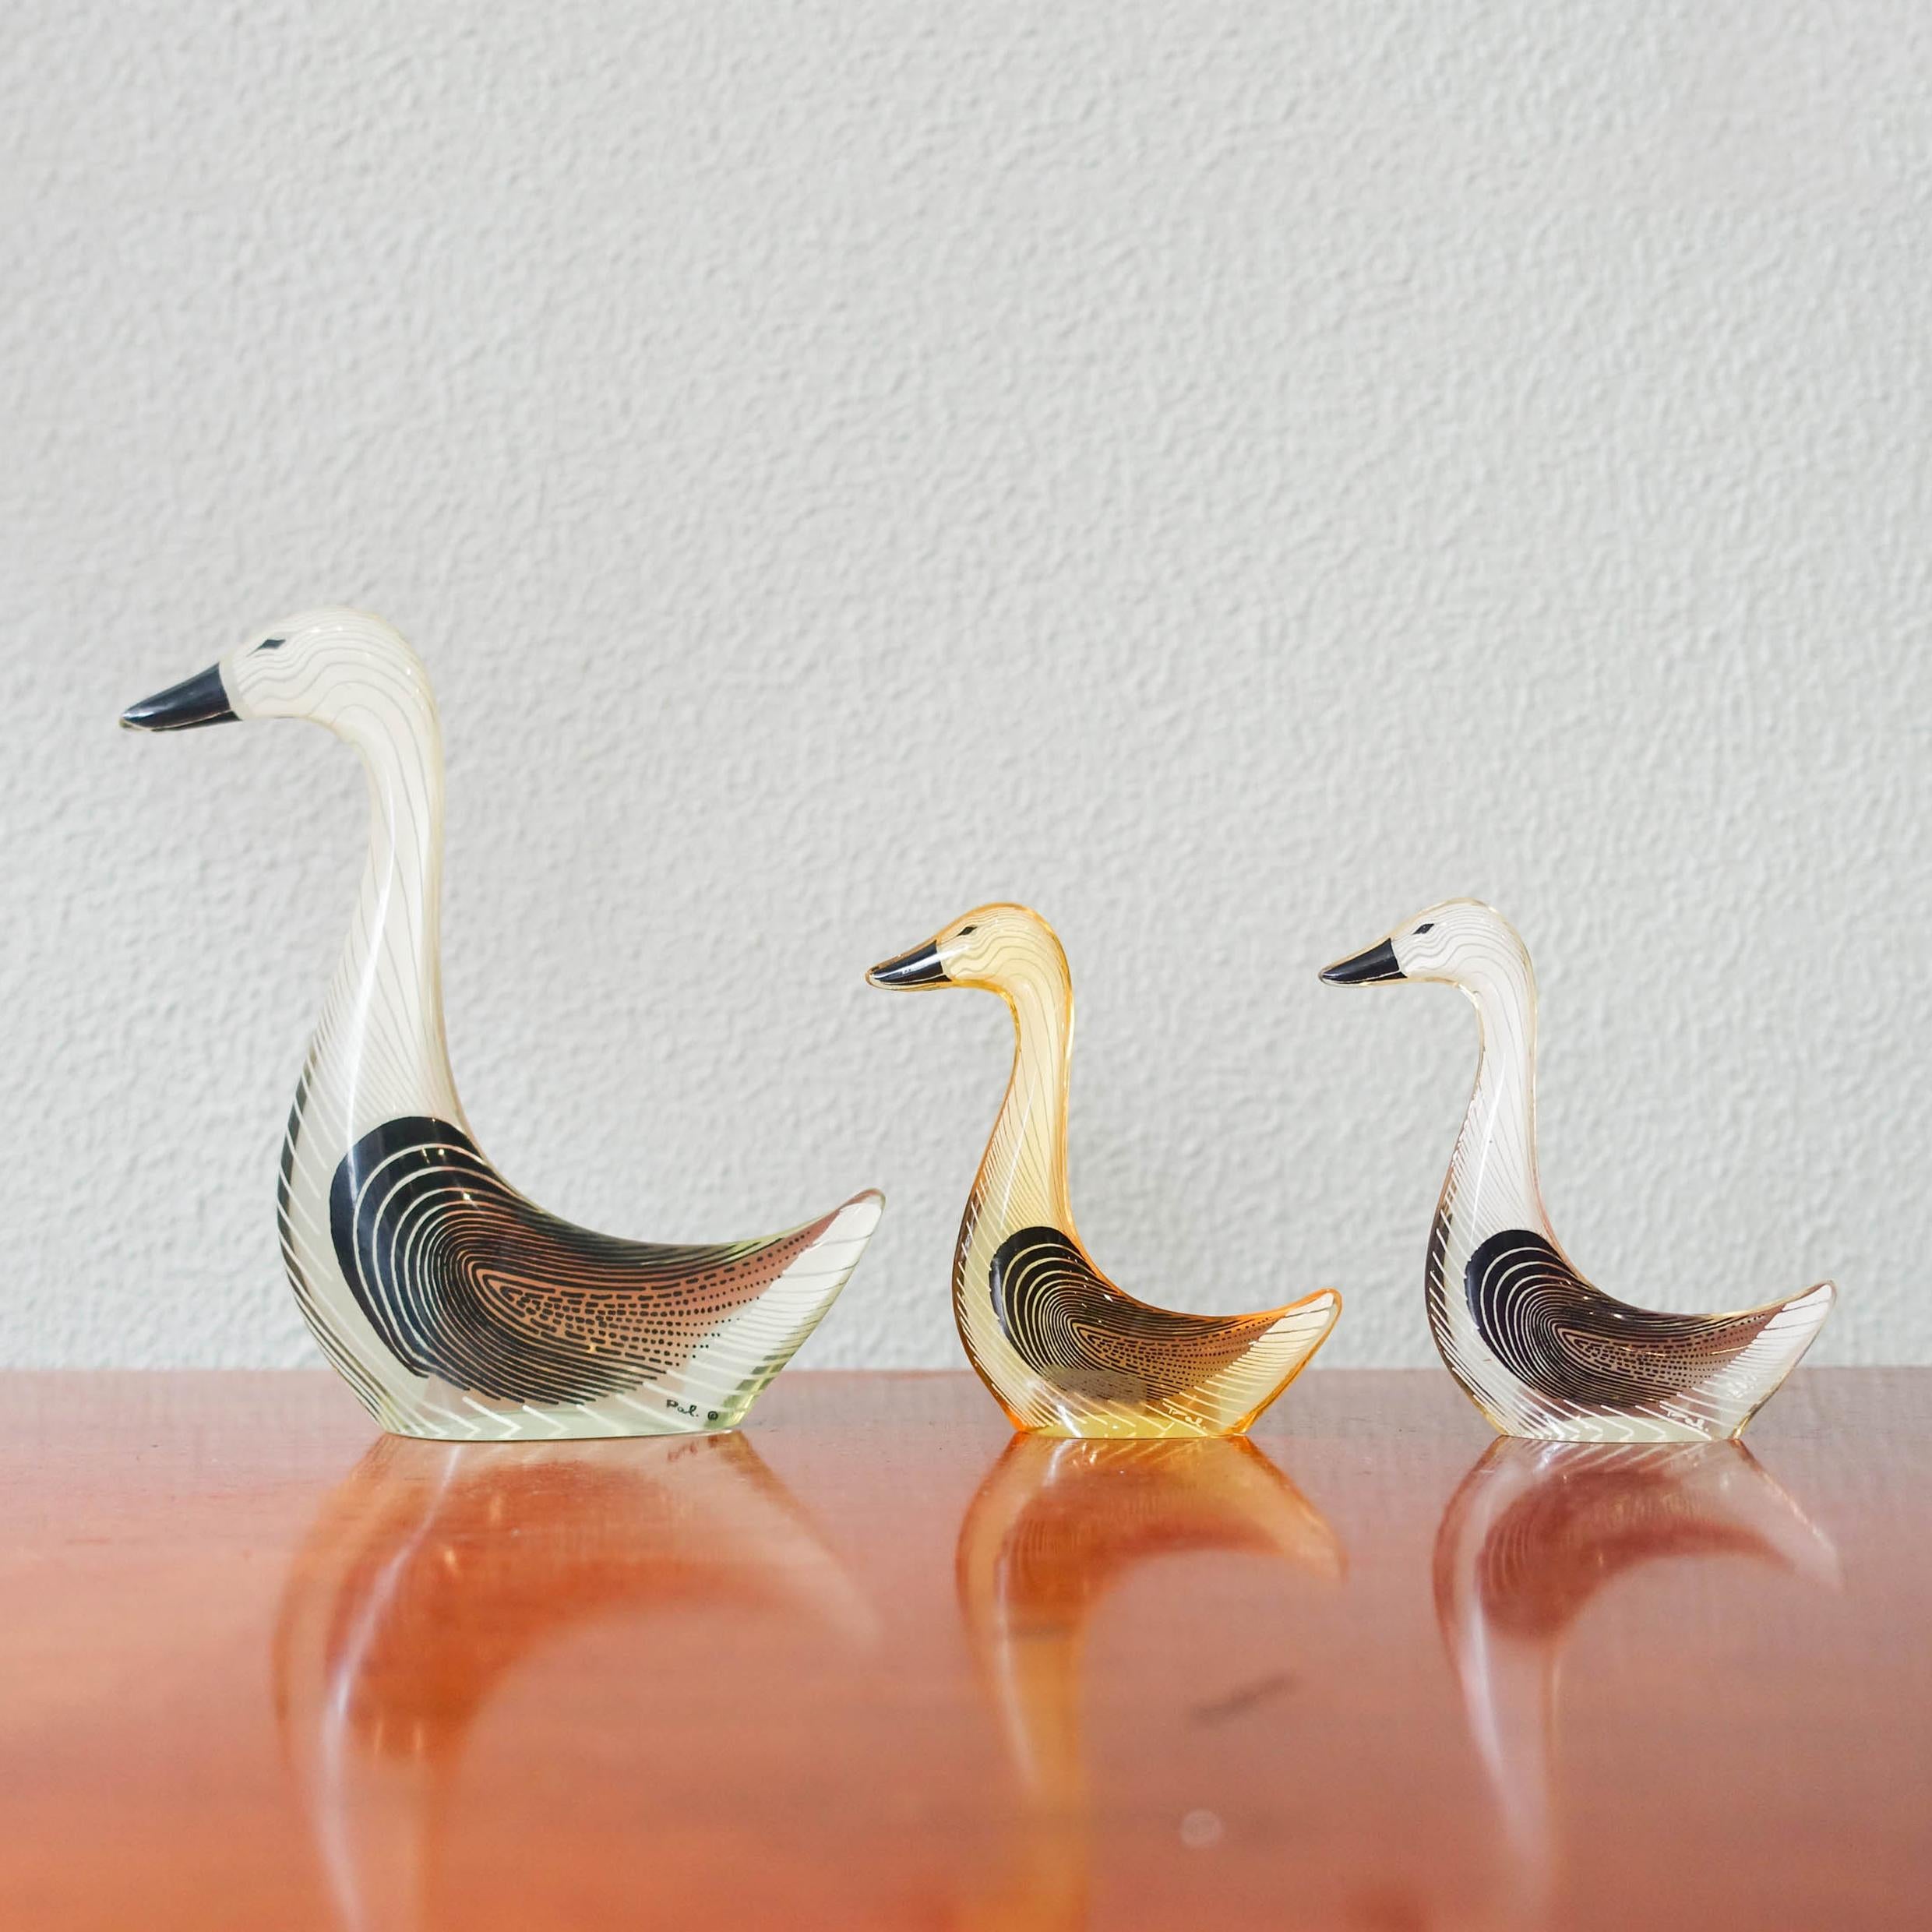 This set of geese was designed and made by Abraham Palatnik, in Brazil, during the 1970's. The Brazilian artist Abraham Palatnik (1928 - 2020) was the founder of the technological movement in Brazilian art, and a Pioneer in making Kinetic